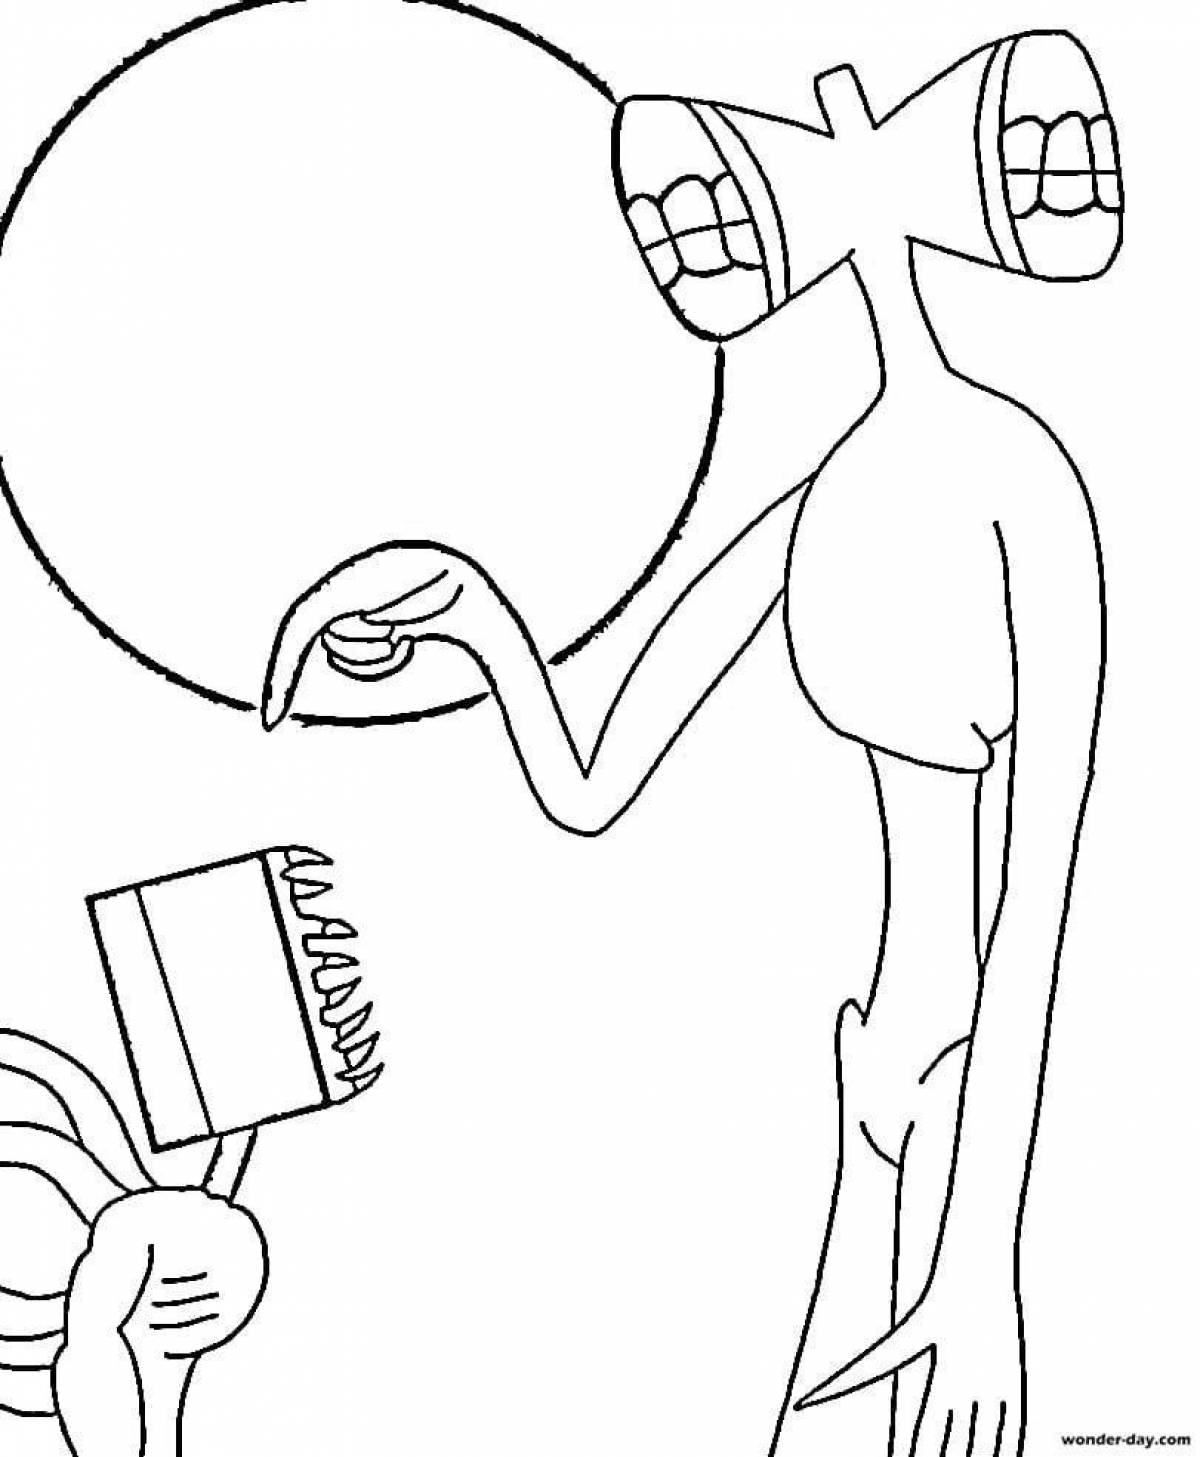 Exotic siren head coloring page